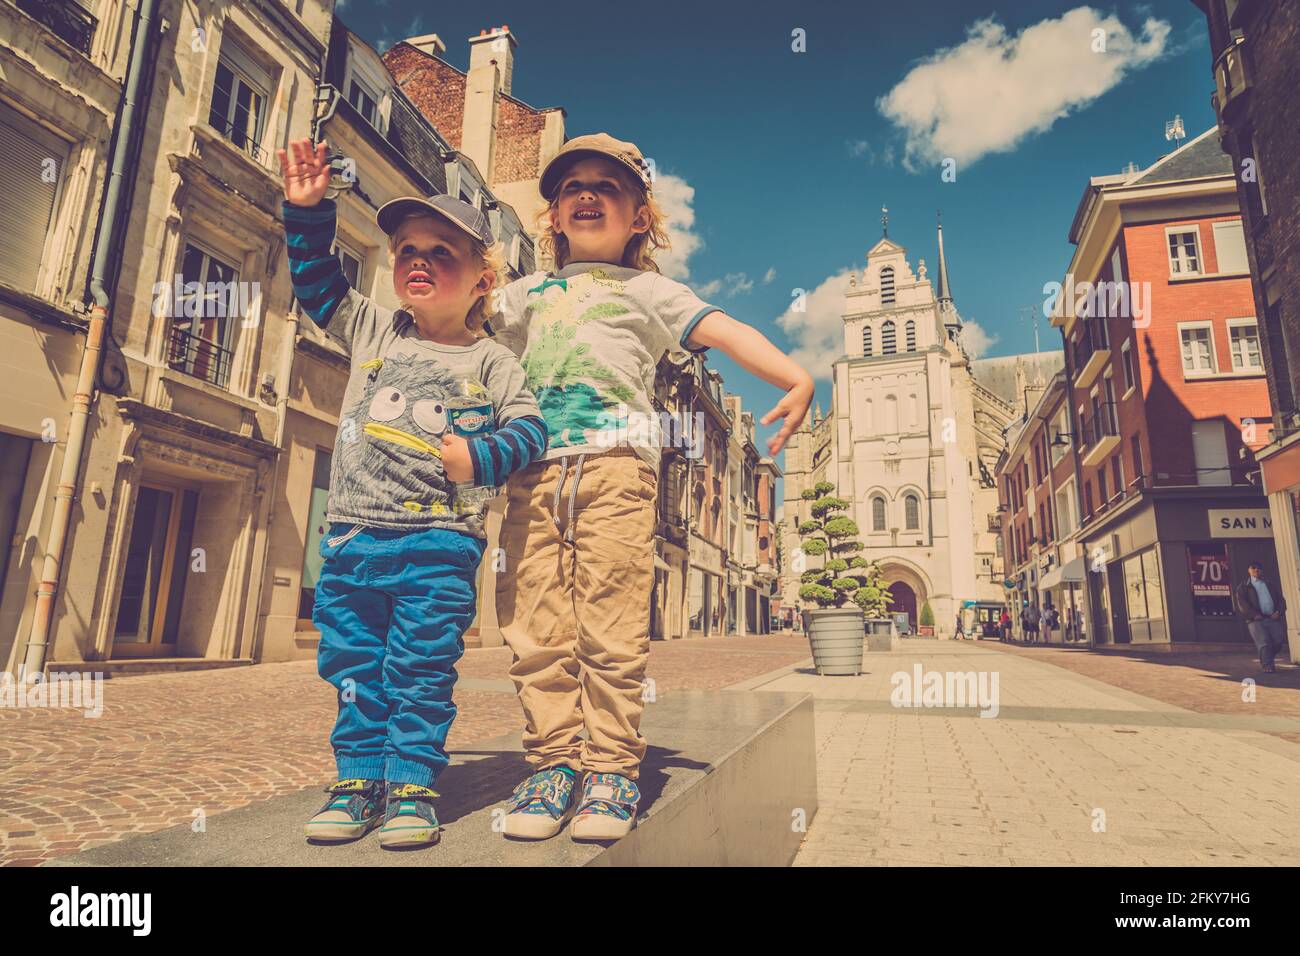 Two young boys dancing in the street Stock Photo